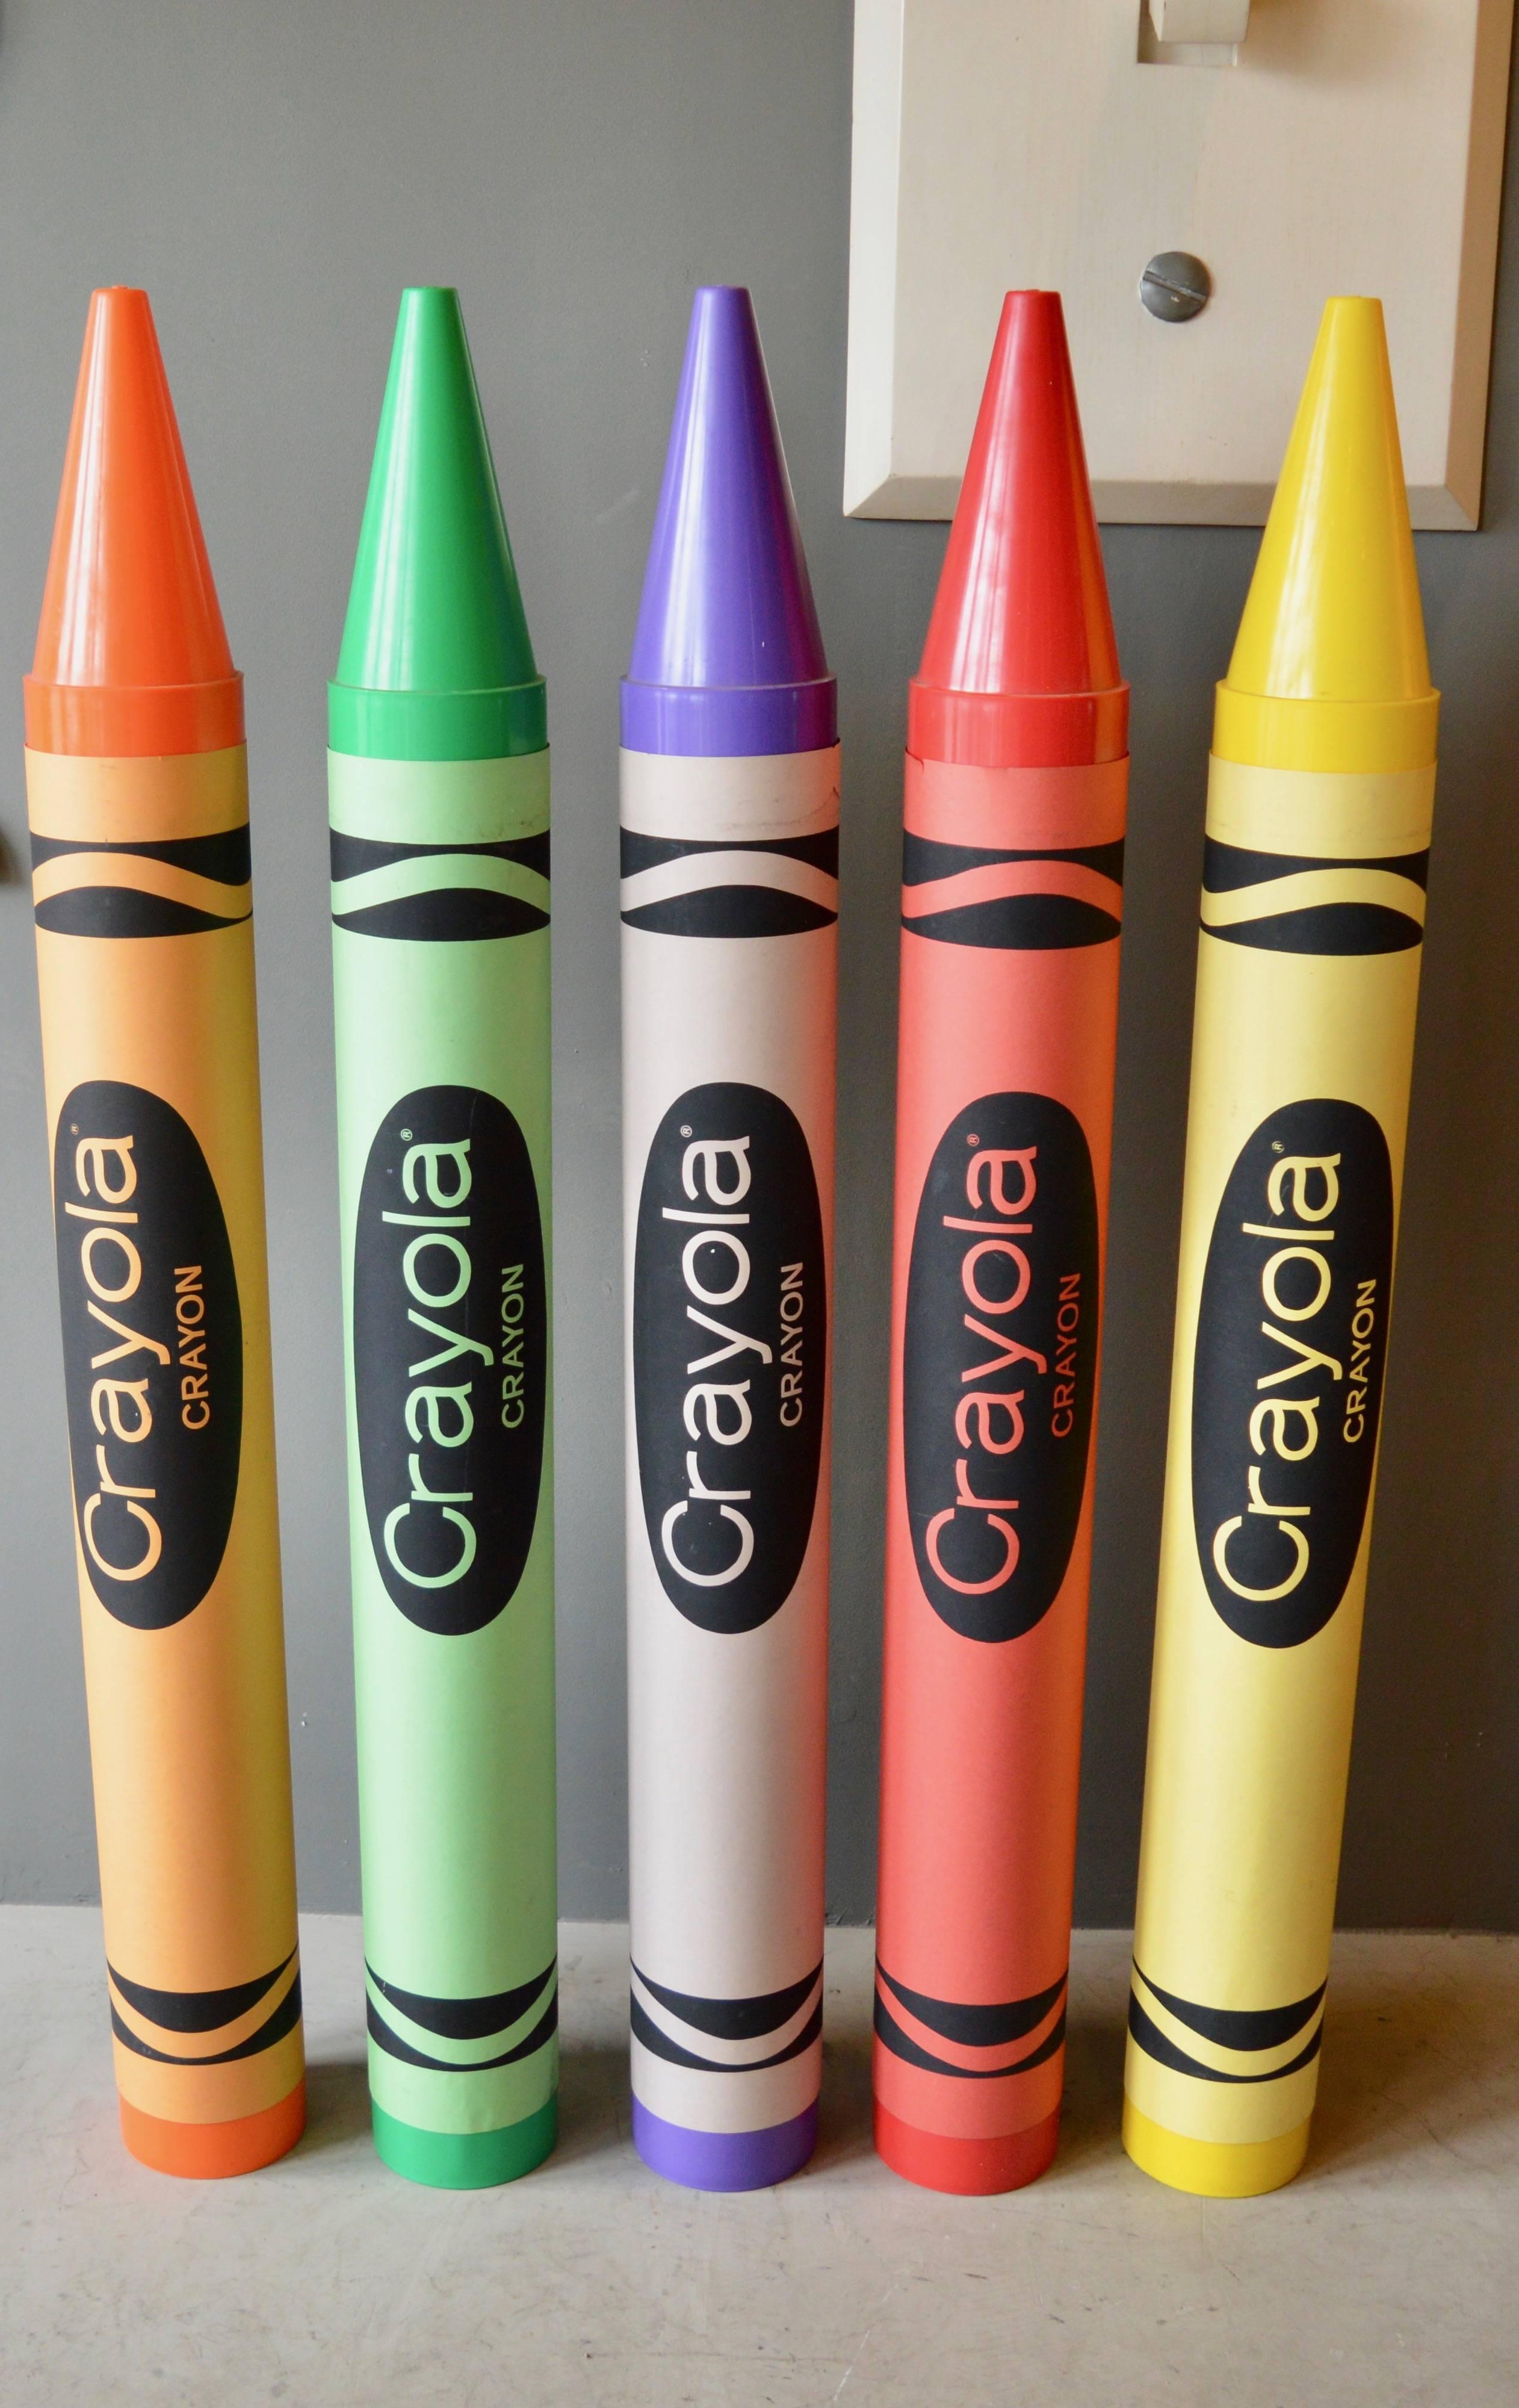 Very rare set of monumental Crayola crayons. Each crayon is just under 5 feet tall! Red, orange, yellow, green and purple. Heavy plastic frame with thick paper label. Made by Think Big. Excellent vintage condition. Great pop art!

Individual red